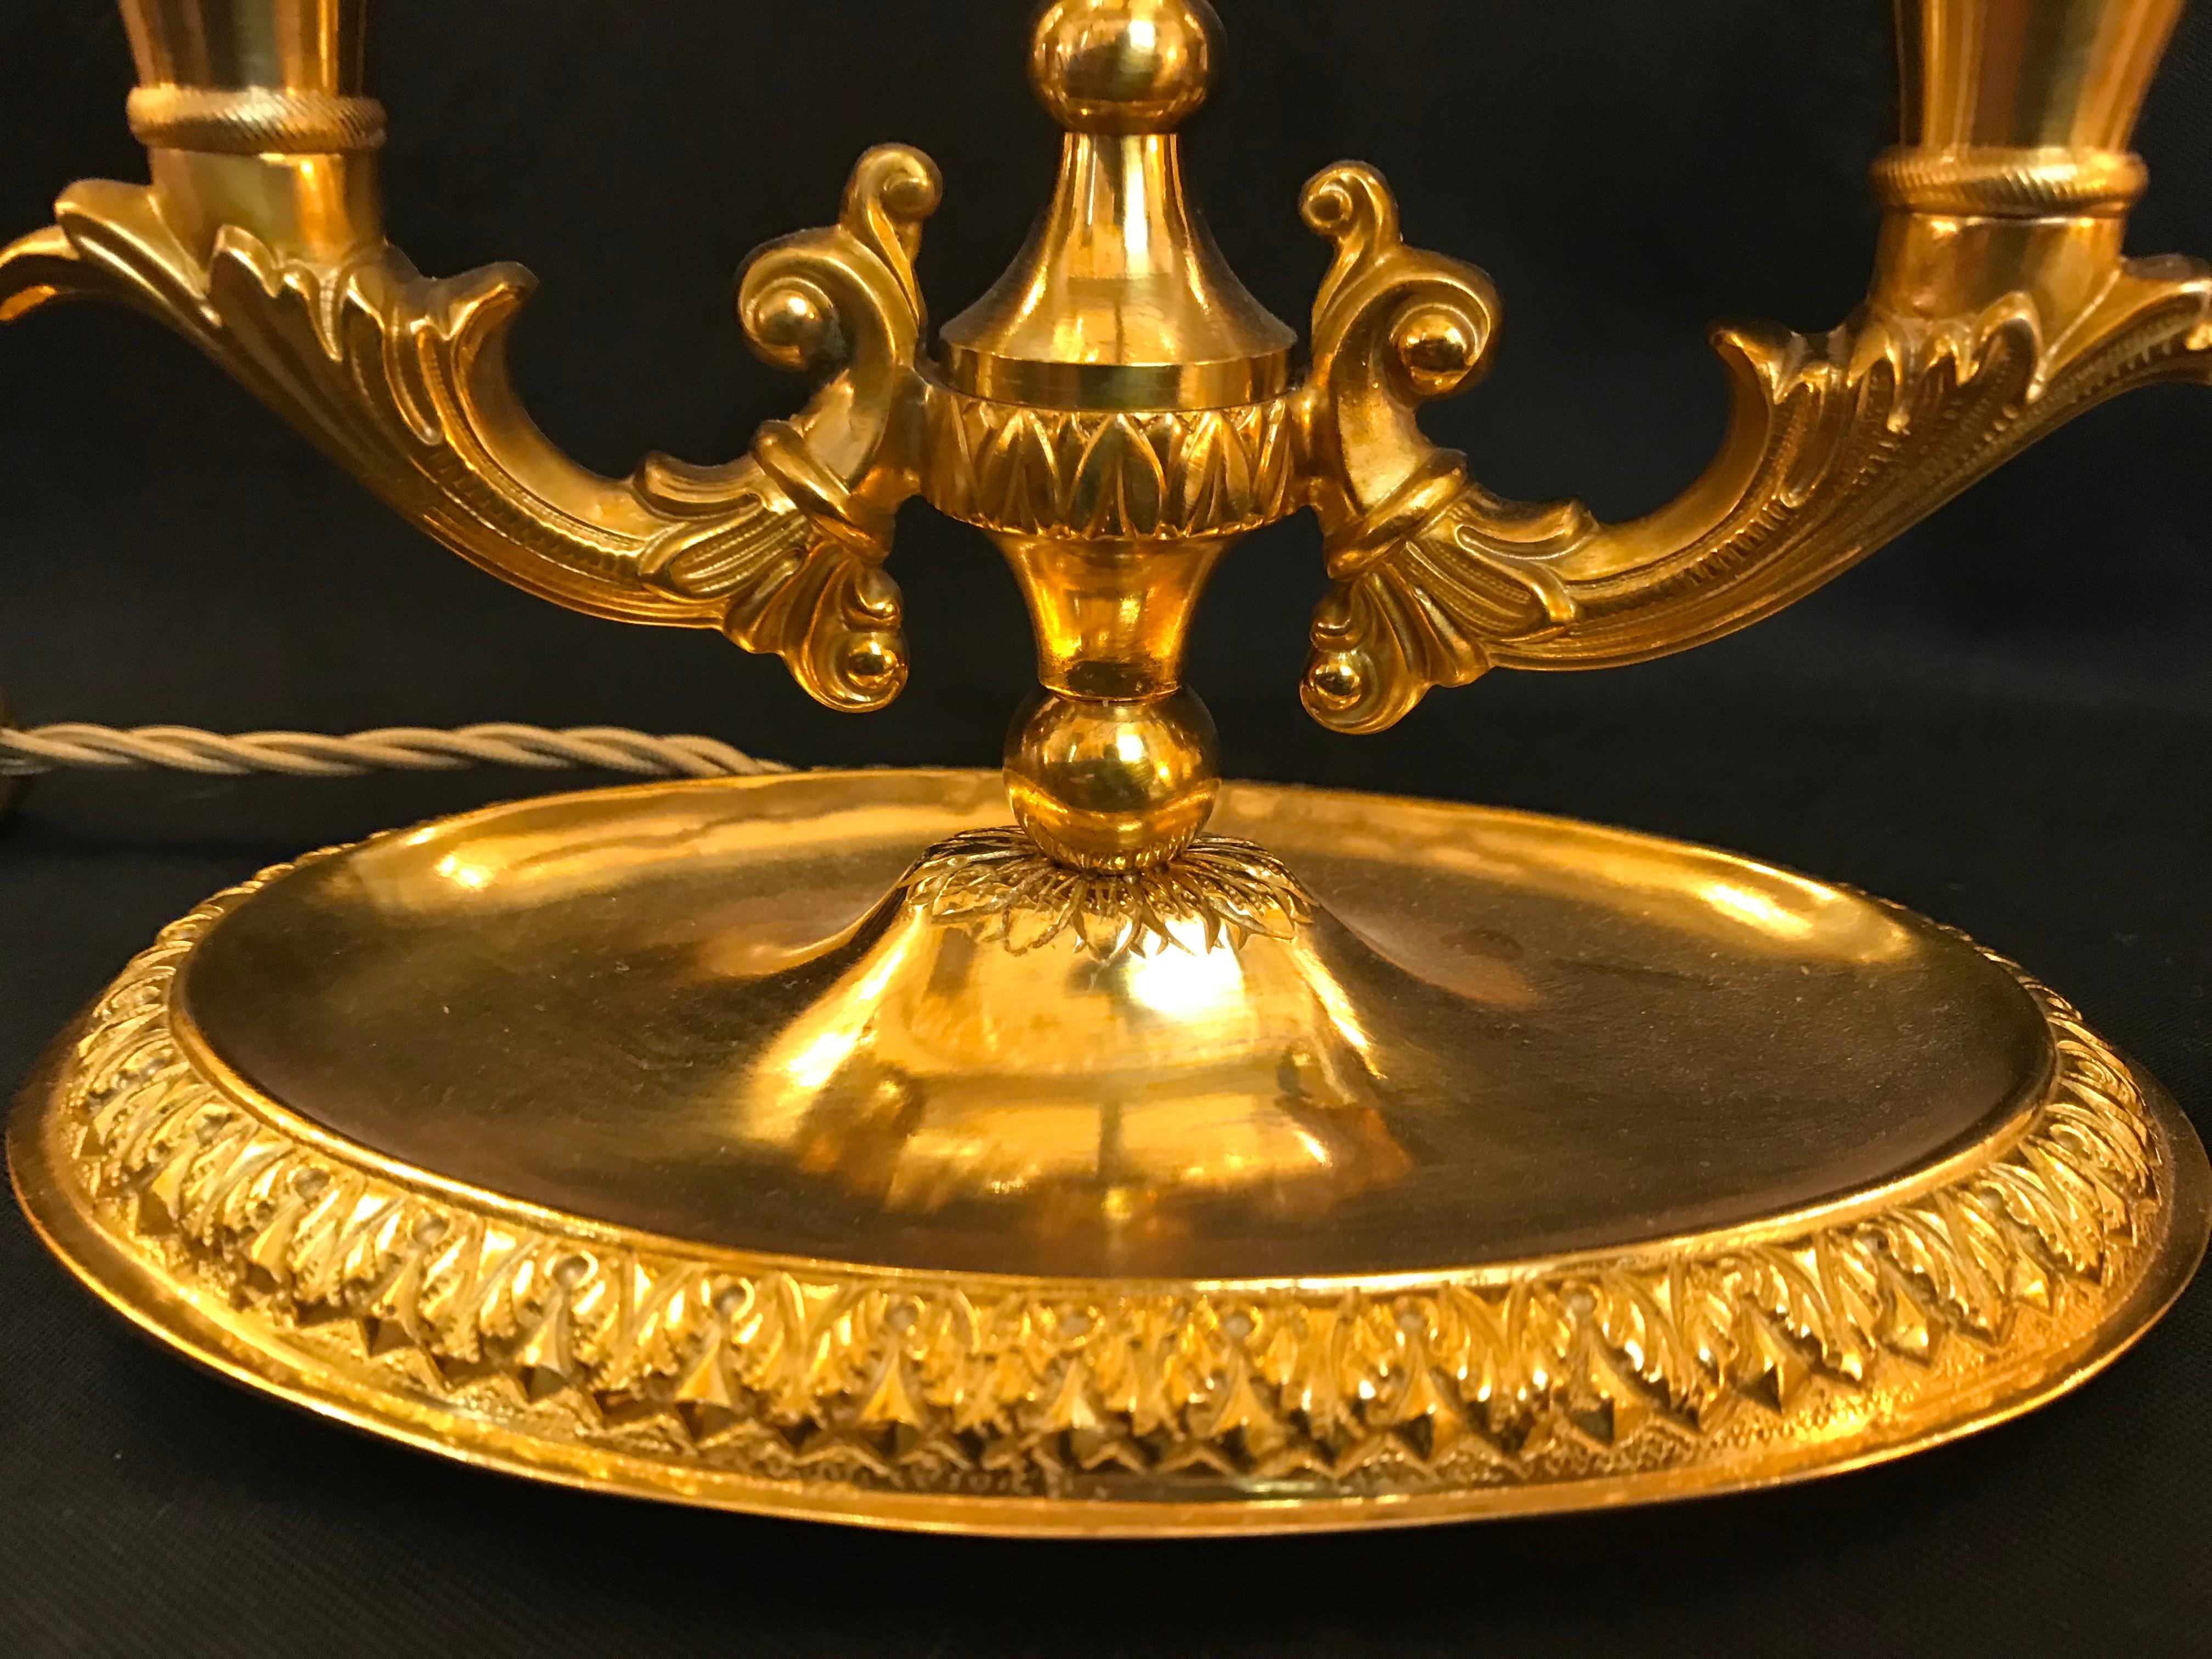 This fine and elegant Louis XVI style gilt bronze and hand-painted tole bouillotte by Gherardo Degli Albizzi has got two lights. The Toleware shade is hand painted with green enamel and gold feather and vegetal decoration and can be customized